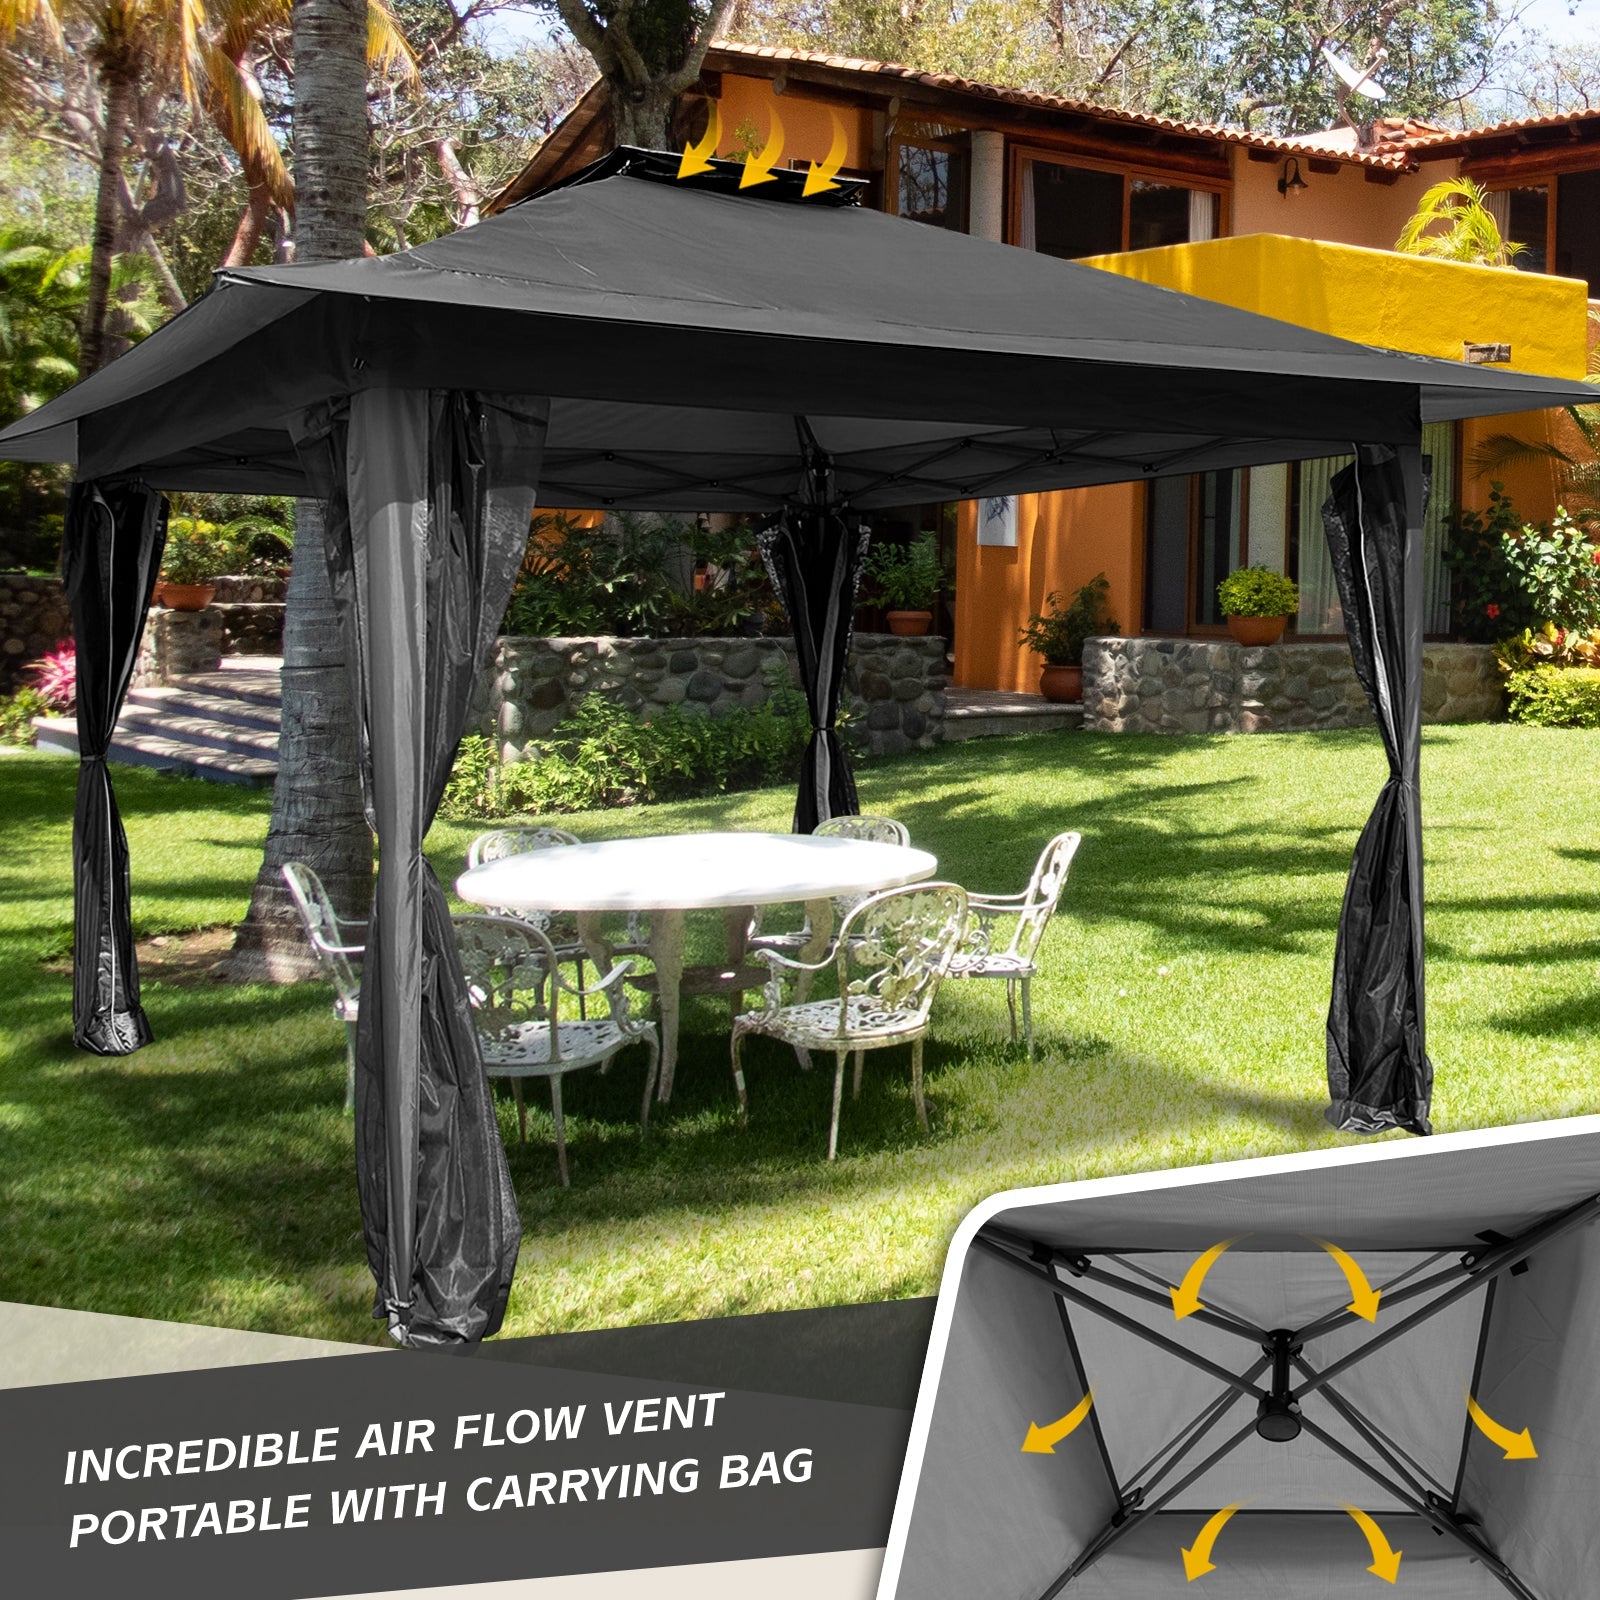 12x12 FT Black | Portable and Spacious Outdoor Gazebo with UV Protection and Mesh Netting